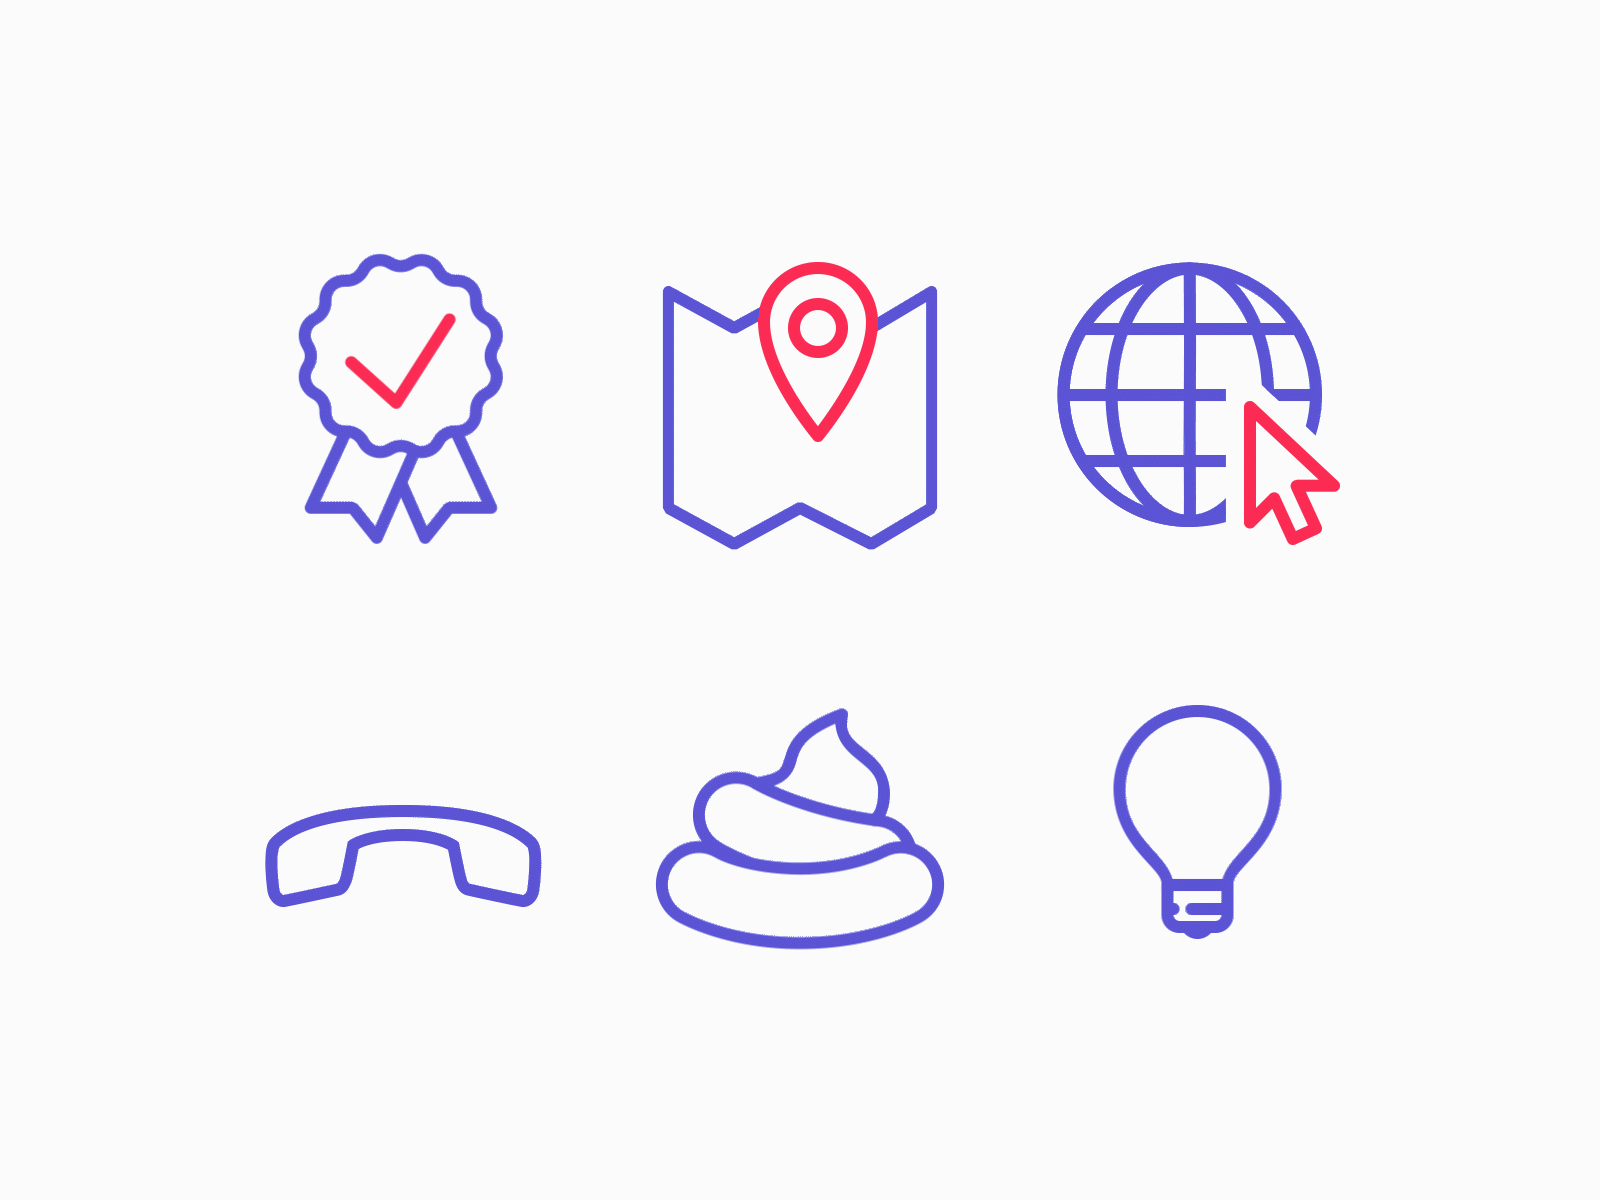 Animated icons iOS style by Nikita Kozin for Icons8 on Dribbble